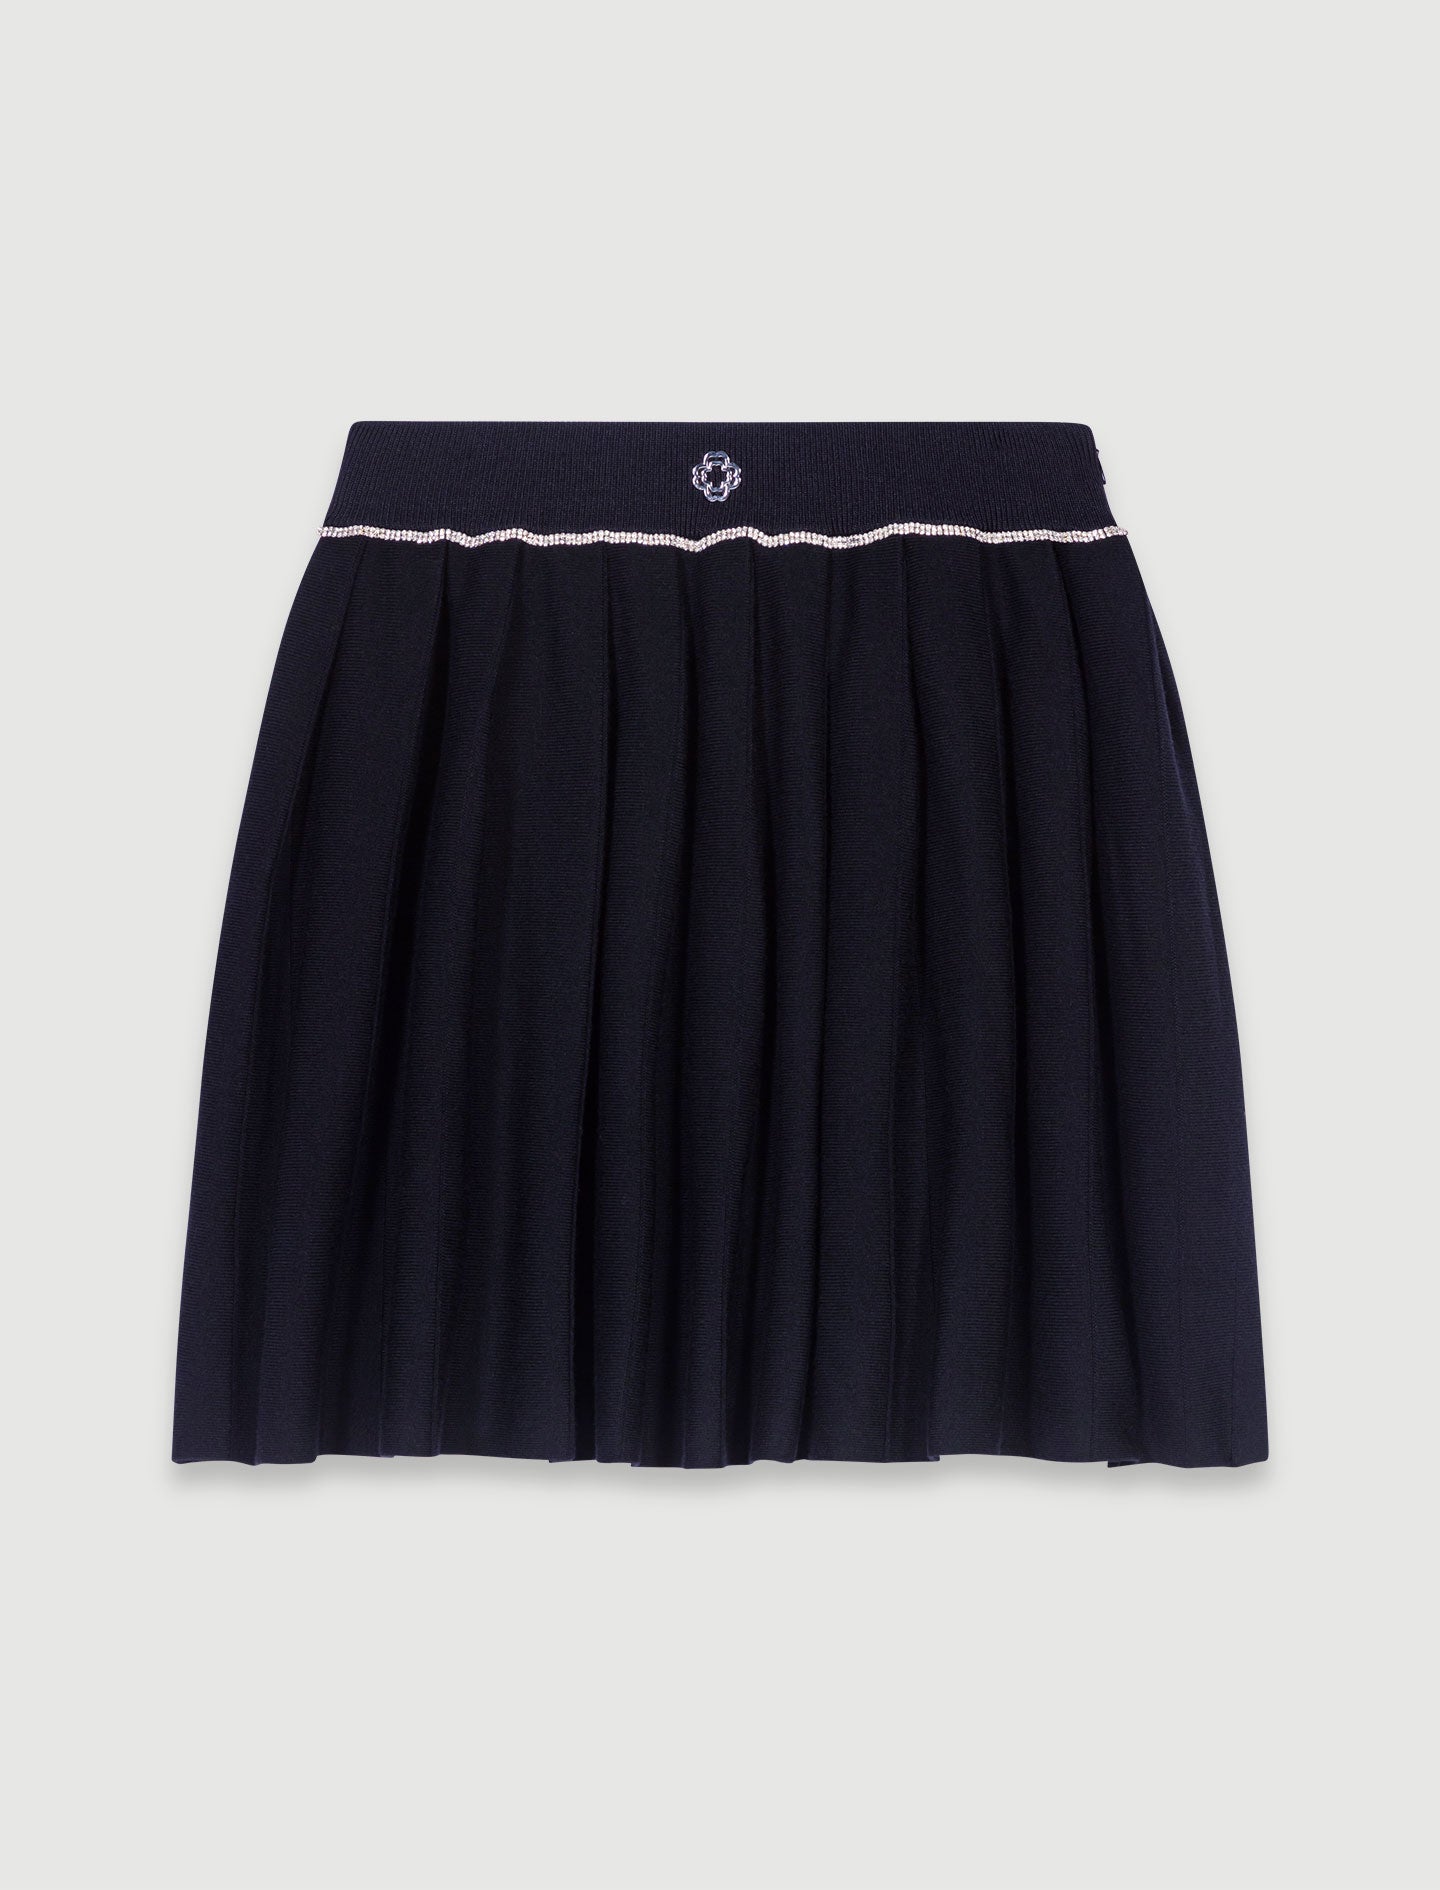 Black featured Pleated knit short skirt